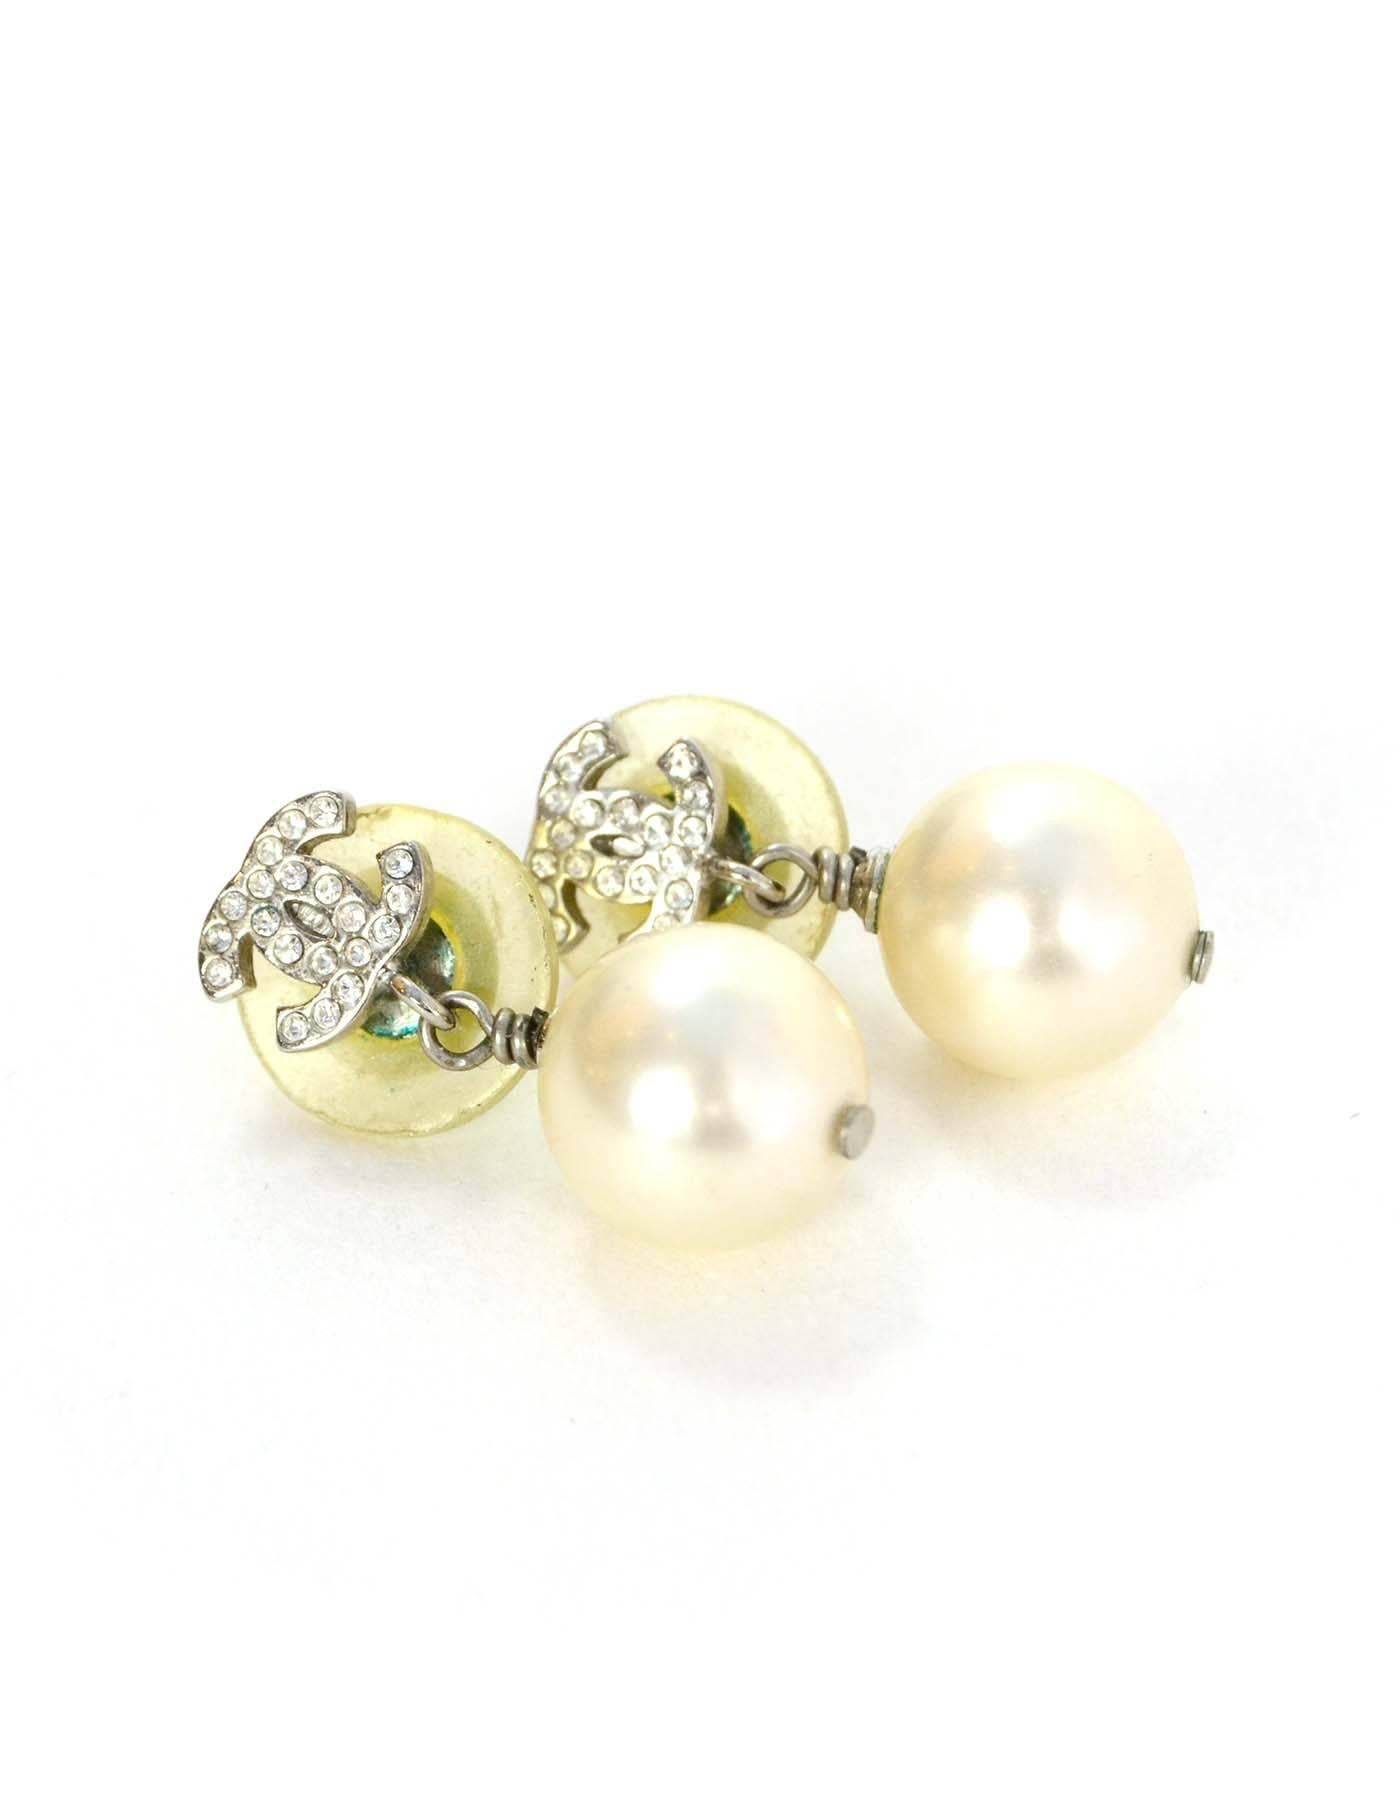 Chanel Crystal & Pearl CC Drop Earrings
Made In: Italy
Year of Production: 2007
Color: Silvertone and ivory
Materials: Metal, crystal and faux pearl
Closure: Pierced back
Stamp: 07 CC A
Overall Condition: Excellent pre-owned condition with